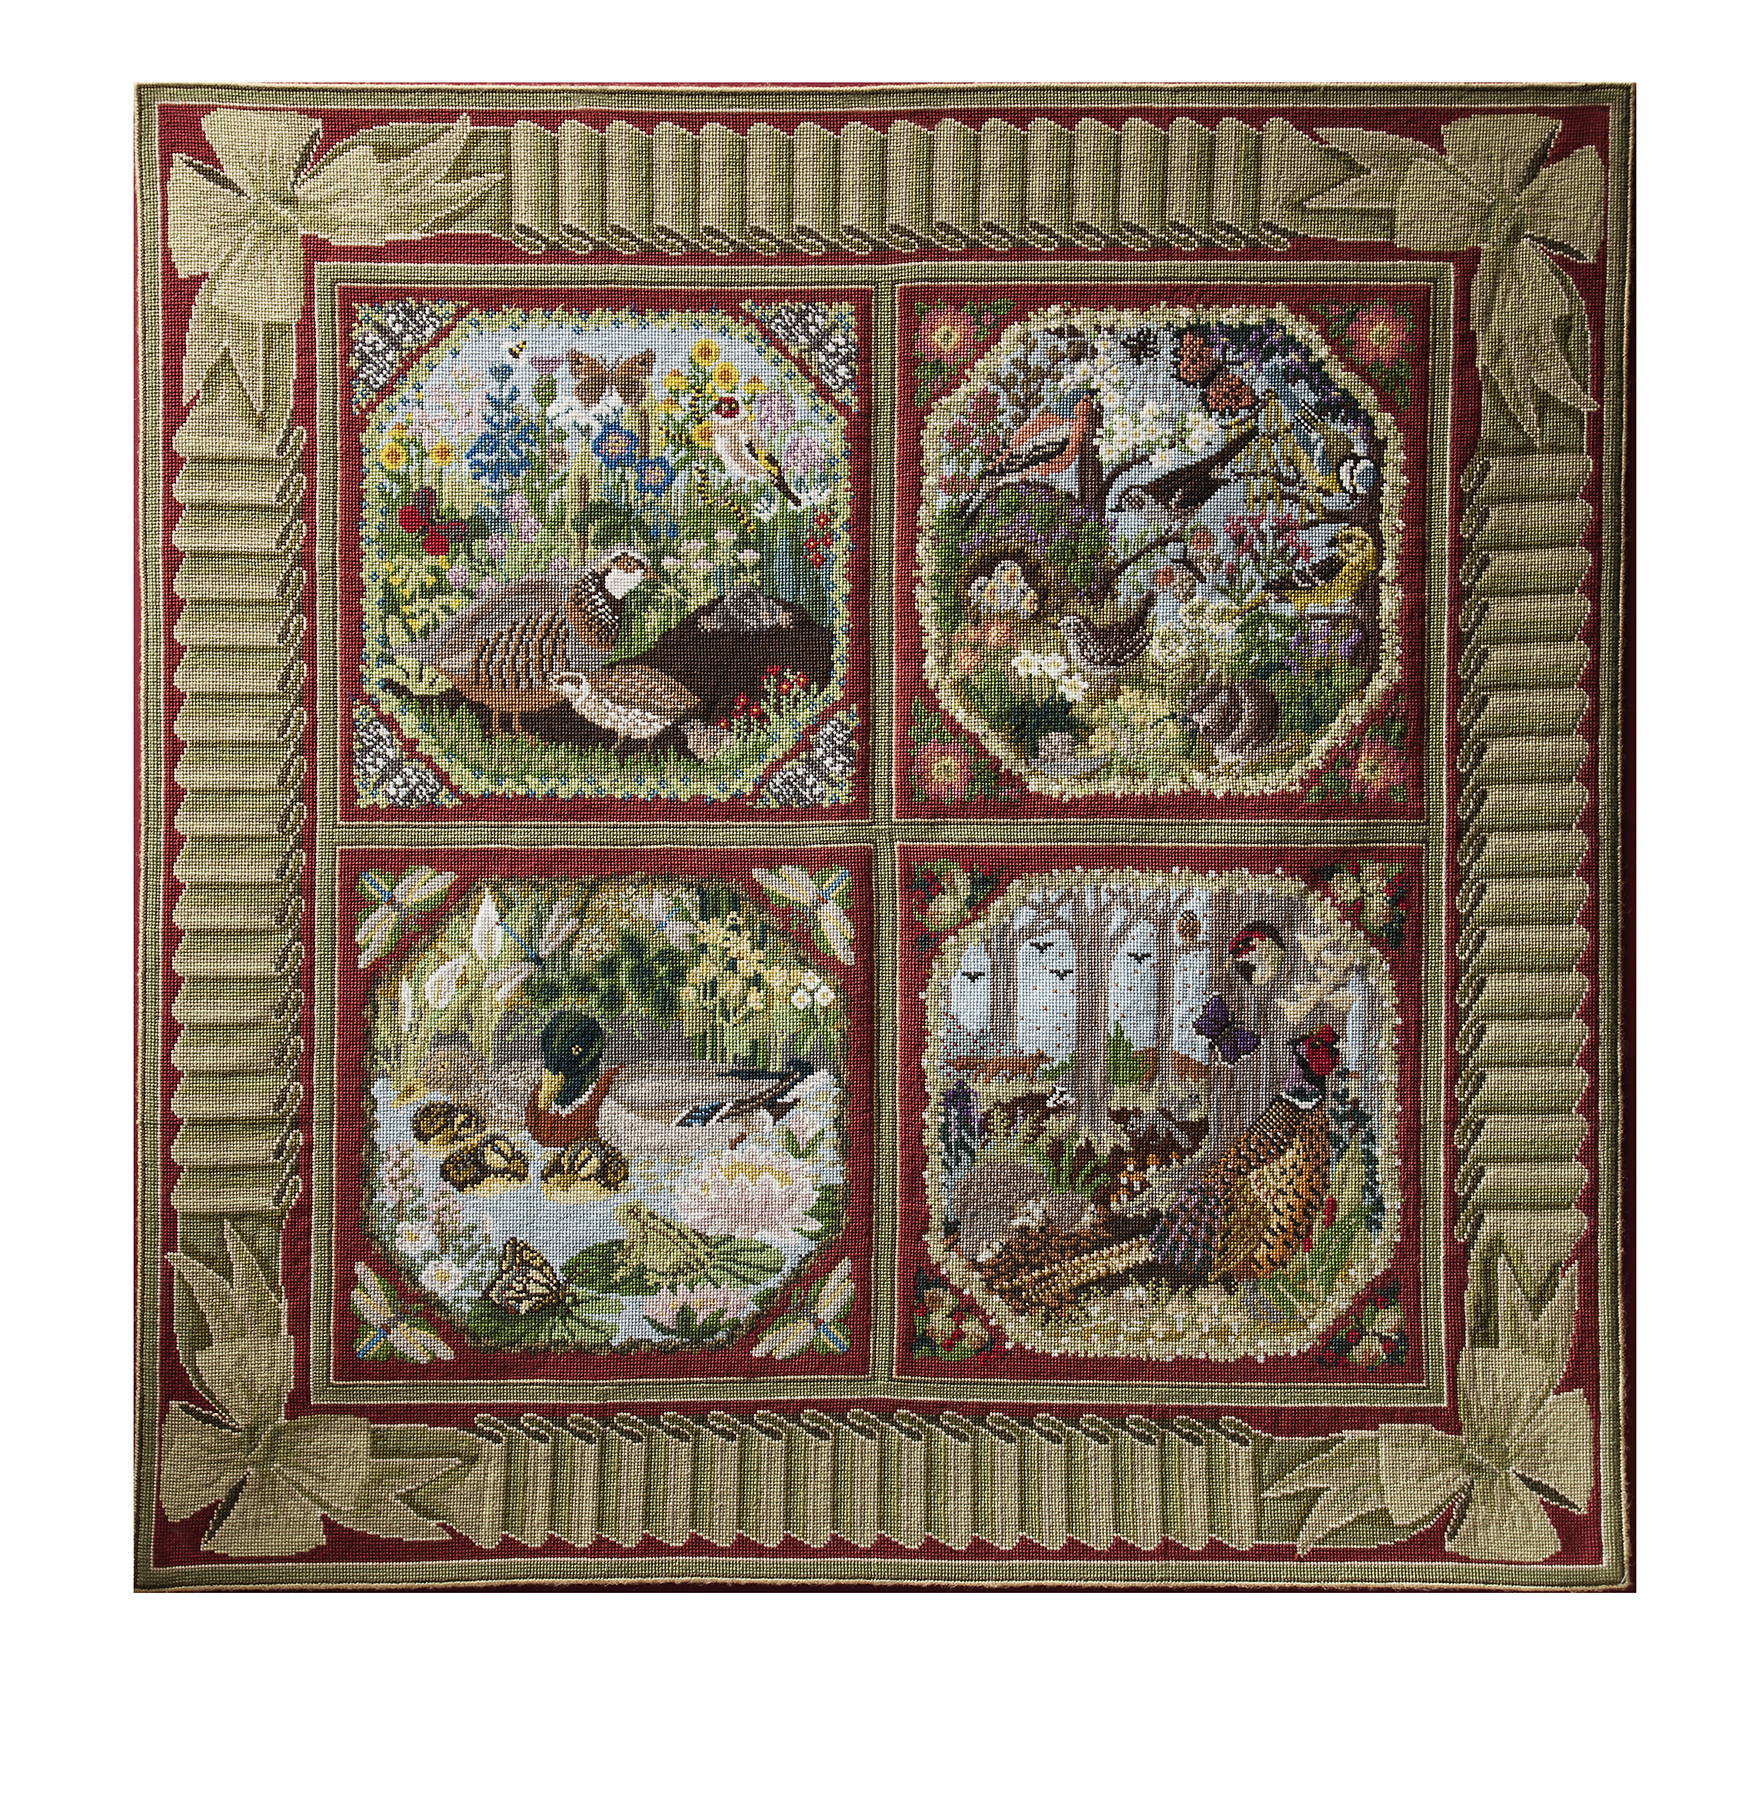 The Natural History series finished as a 4 panel hanging tapestry with decorative border